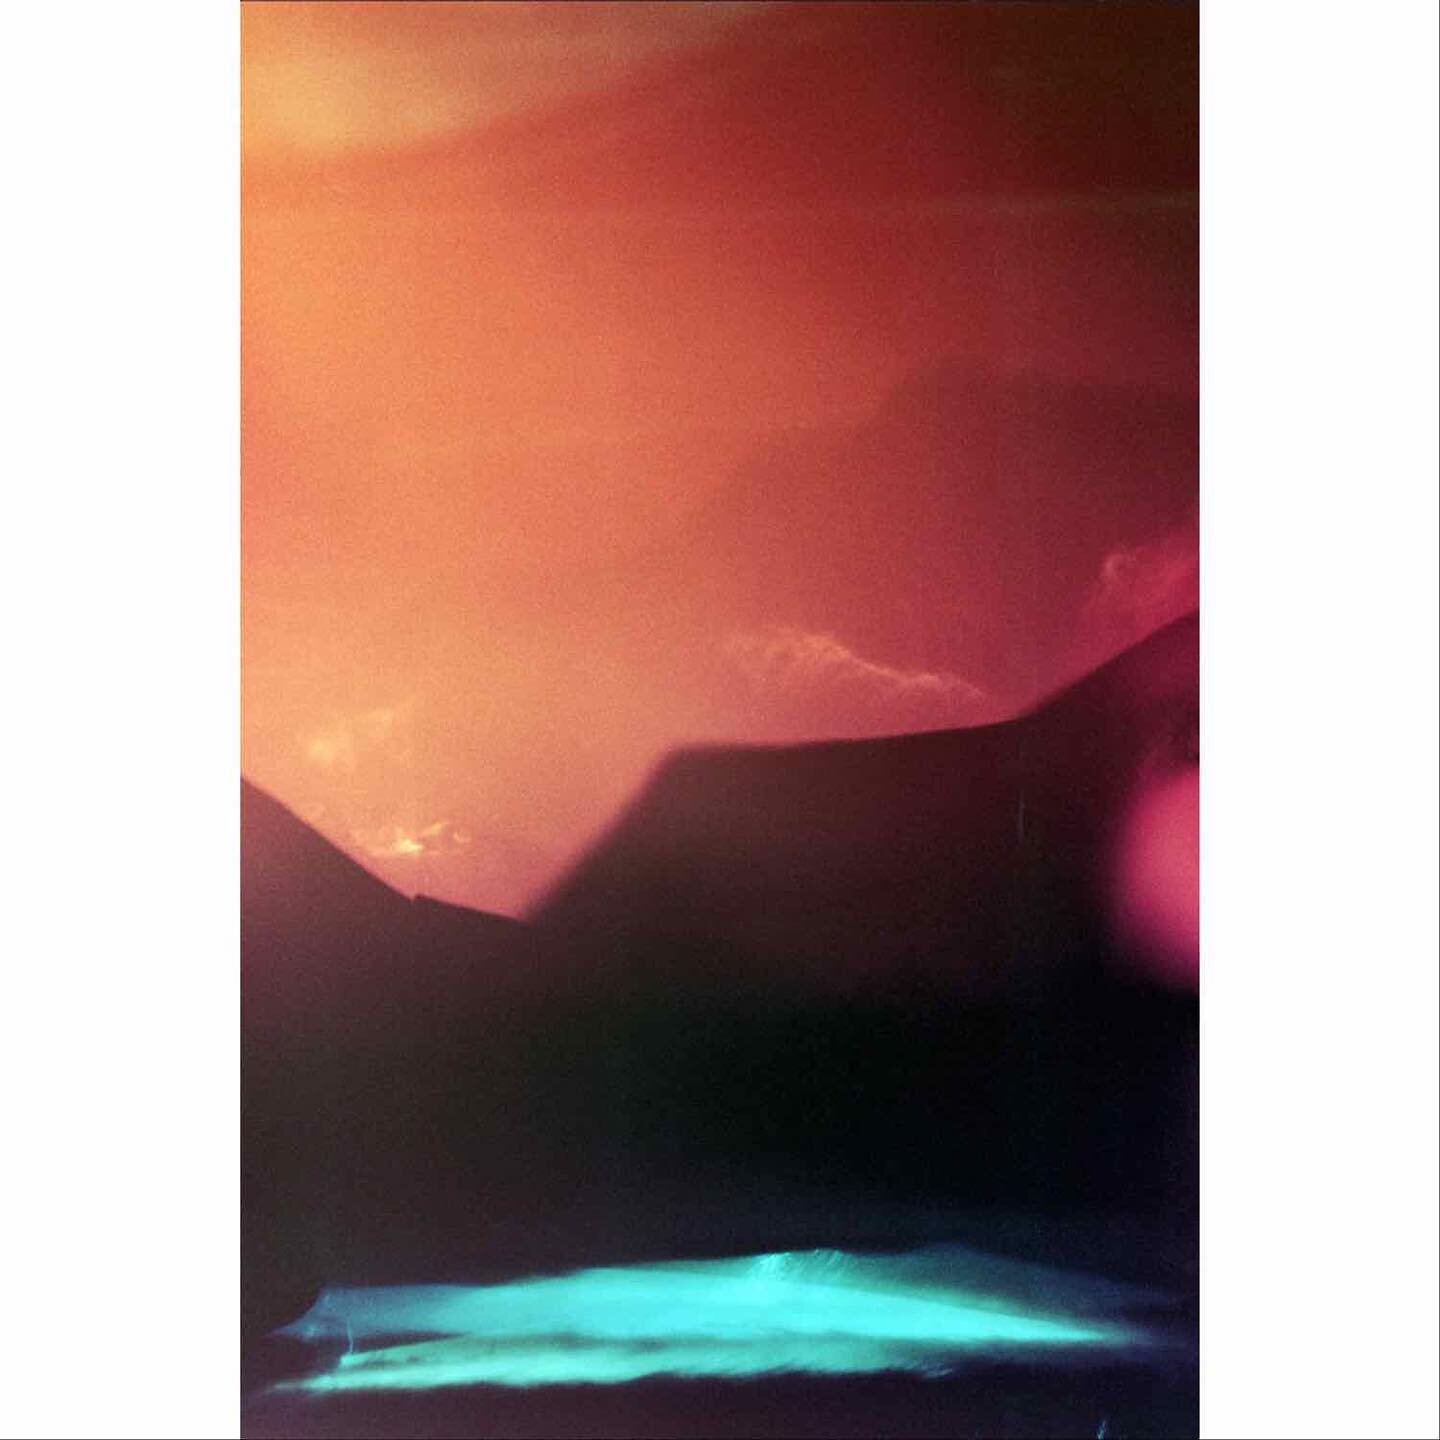 &ldquo;Imagined Landscape #6,&rdquo; 2013. In contrast, here are some old images from the same camera. Same body of work. 
.
.
.
.
.
.
#alternativeprocesses #antiquatedphotography #landscape #landscapephotography #landscapeart #colorfilm #earth #poet